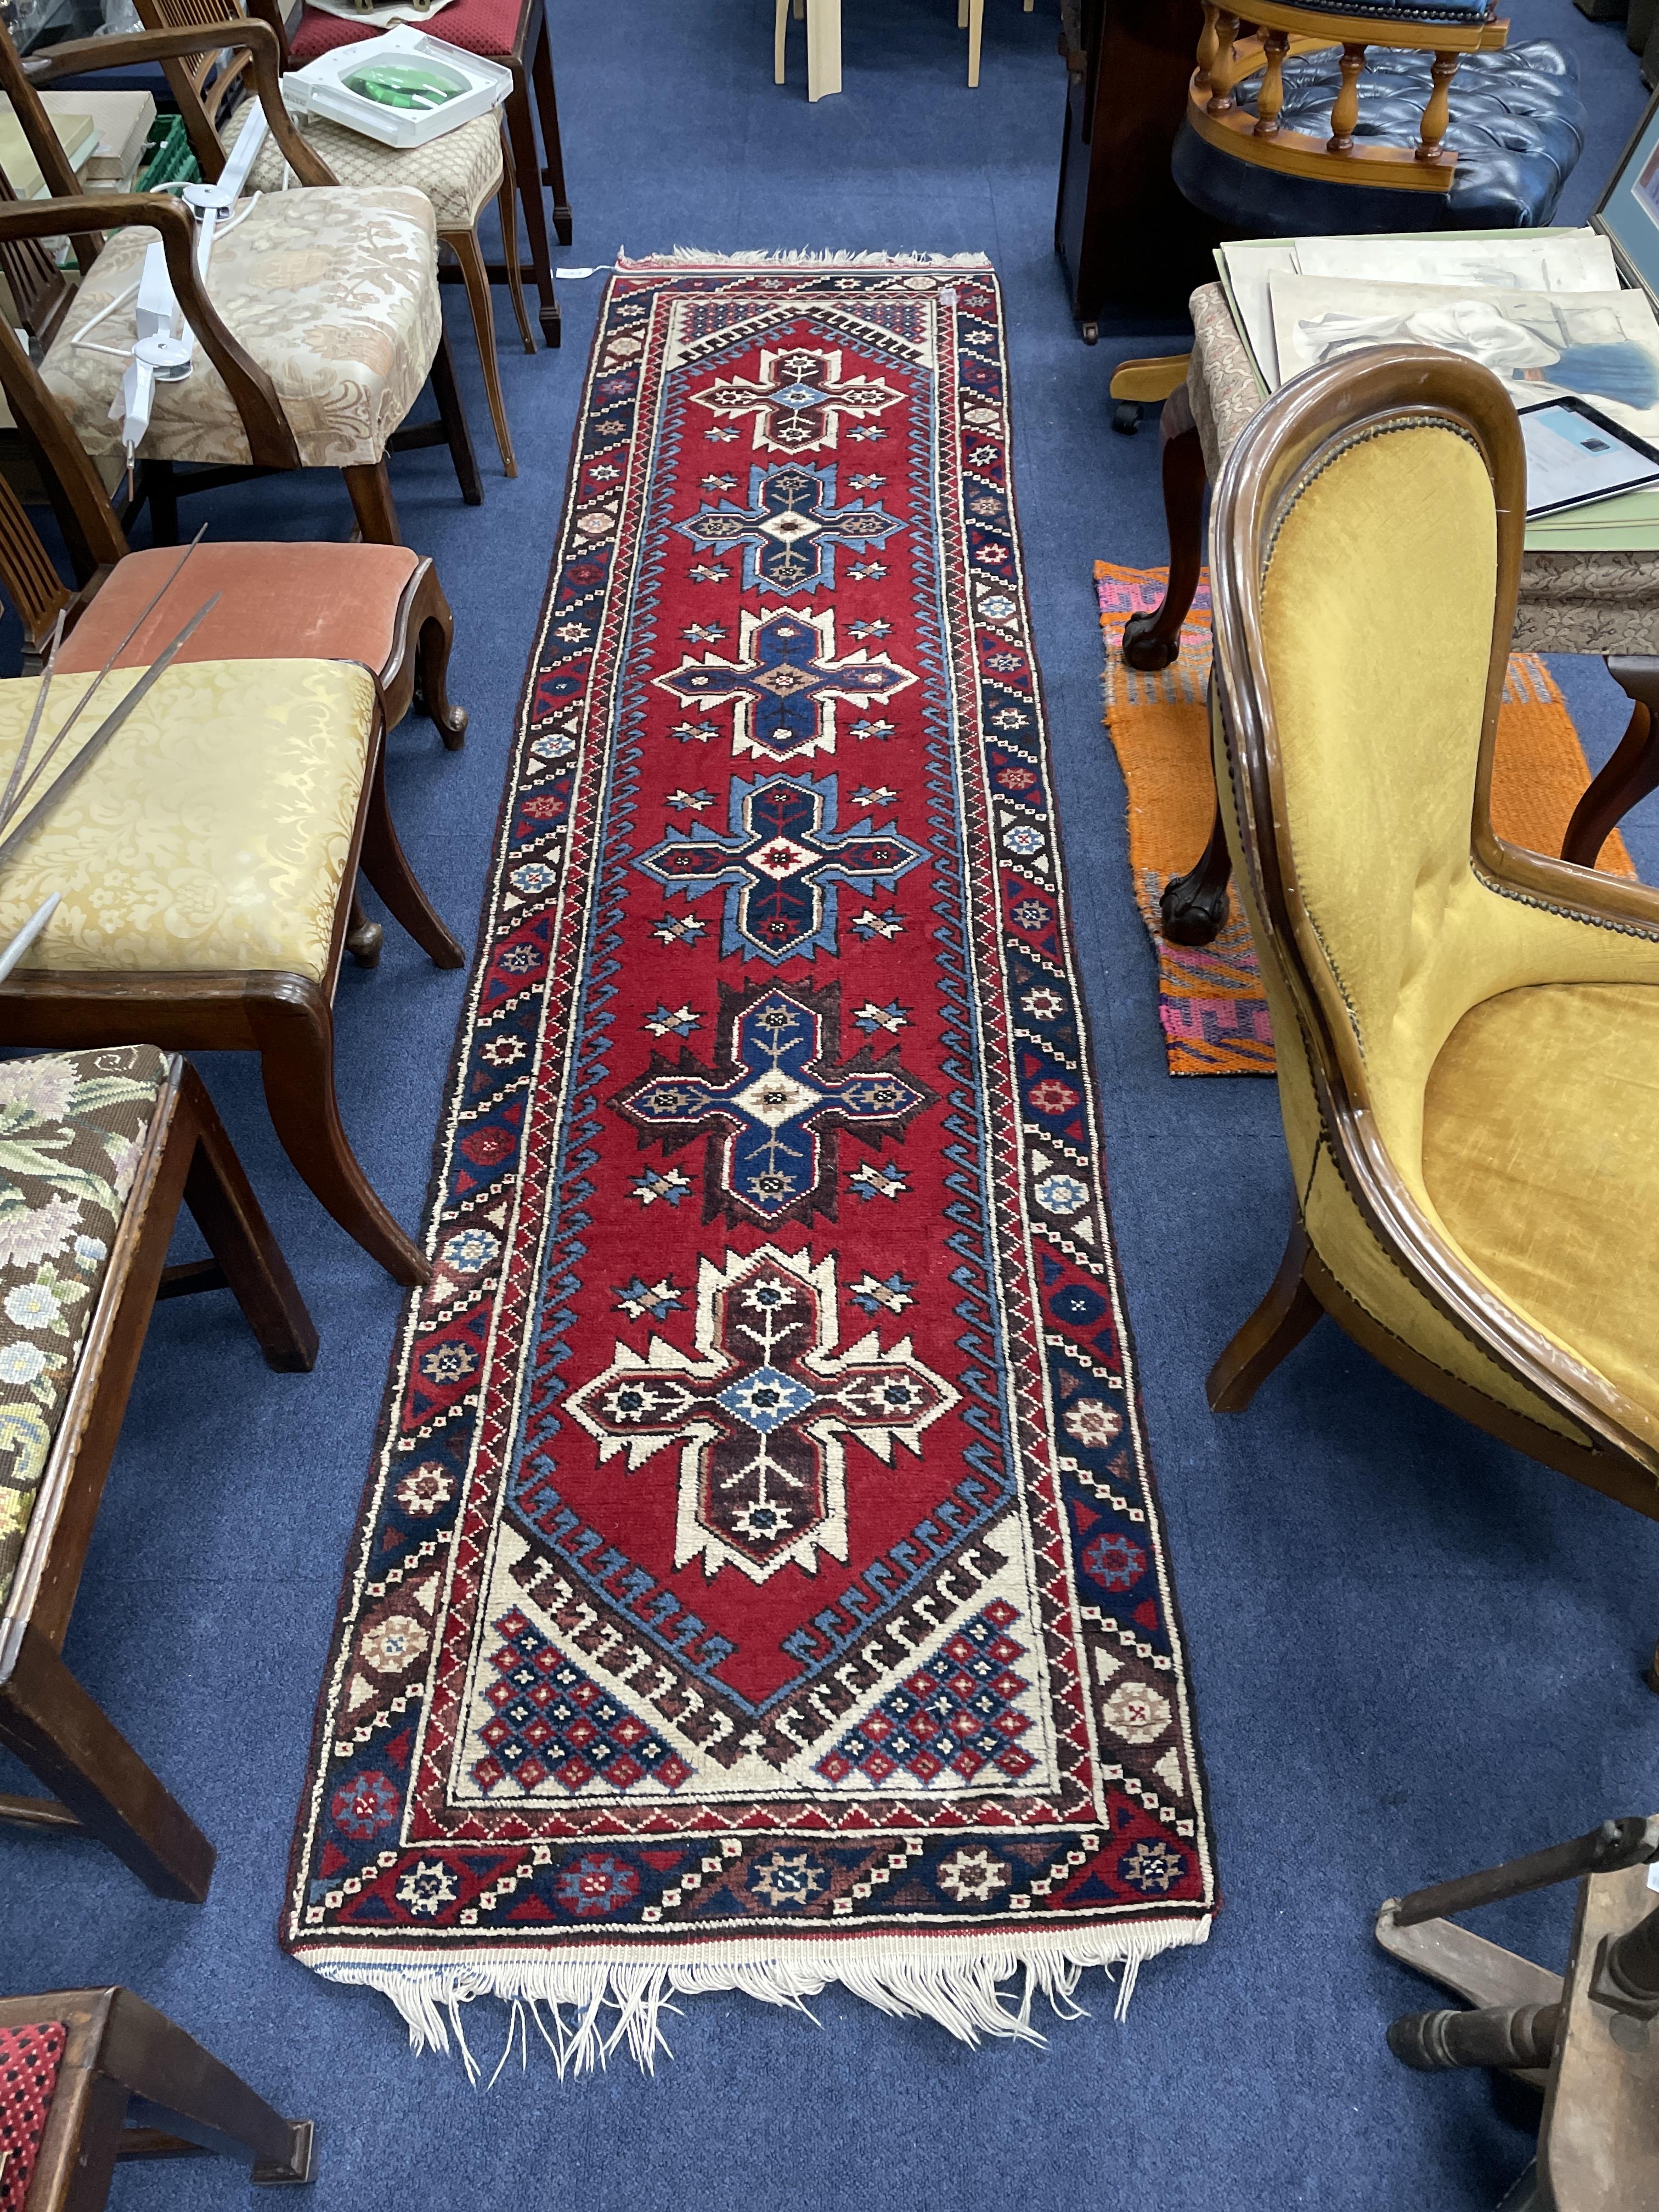 A MIDDLE EASTERN FRINGED AND BORDERED RUNNER AND A RUG - Image 3 of 4